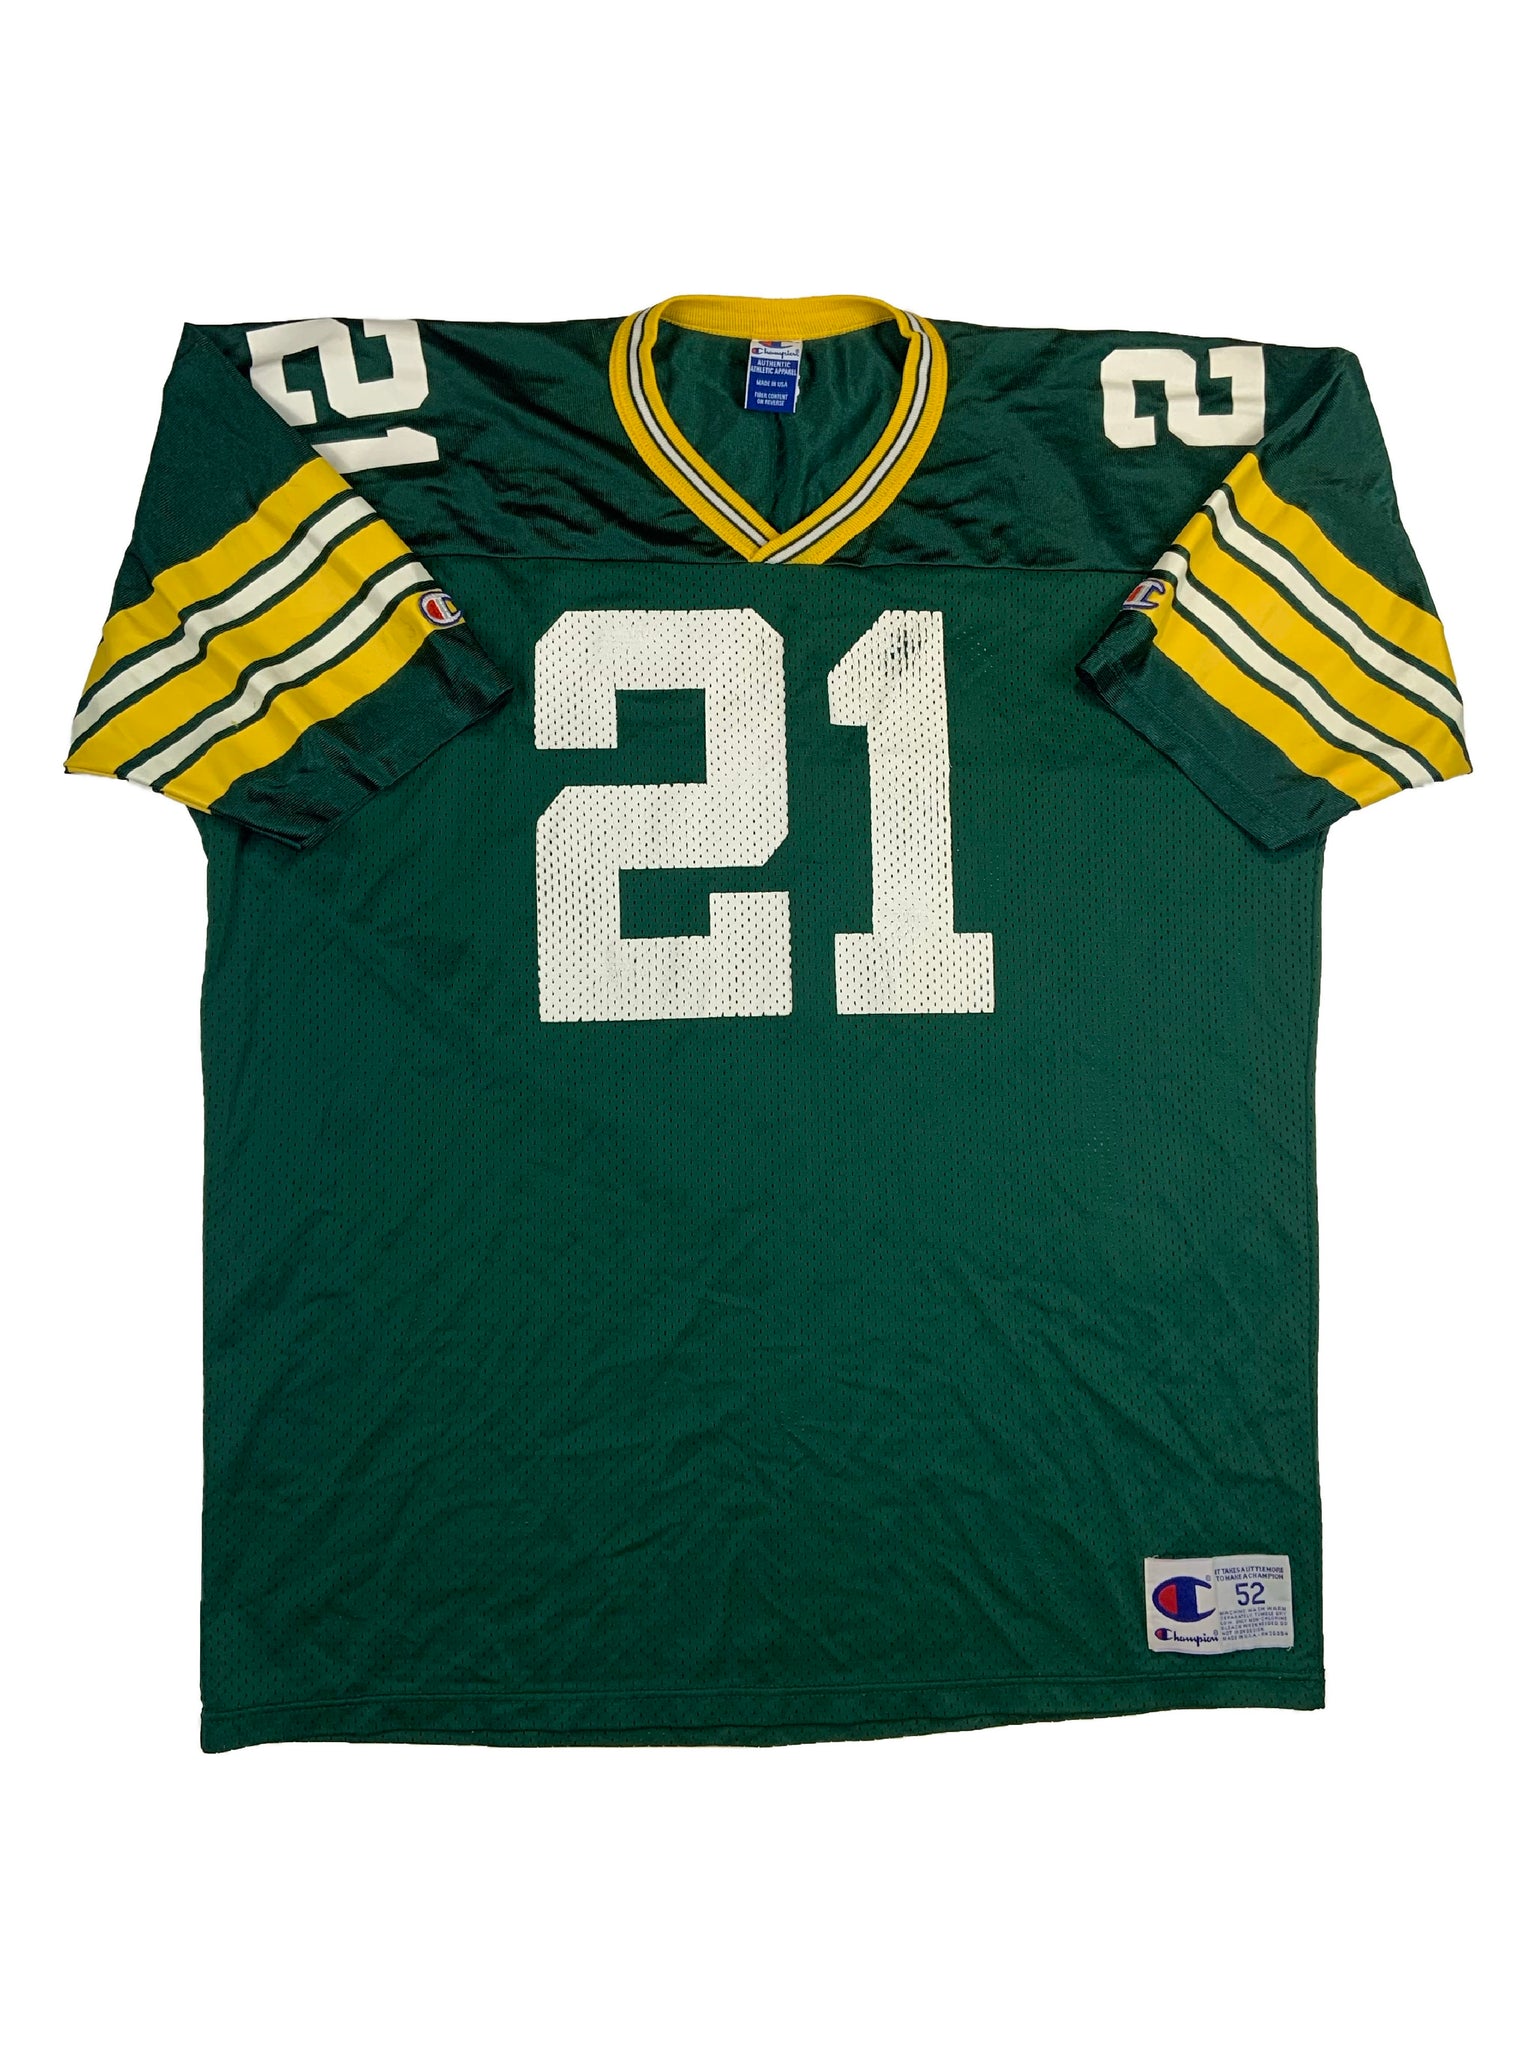 packers 21 jersey